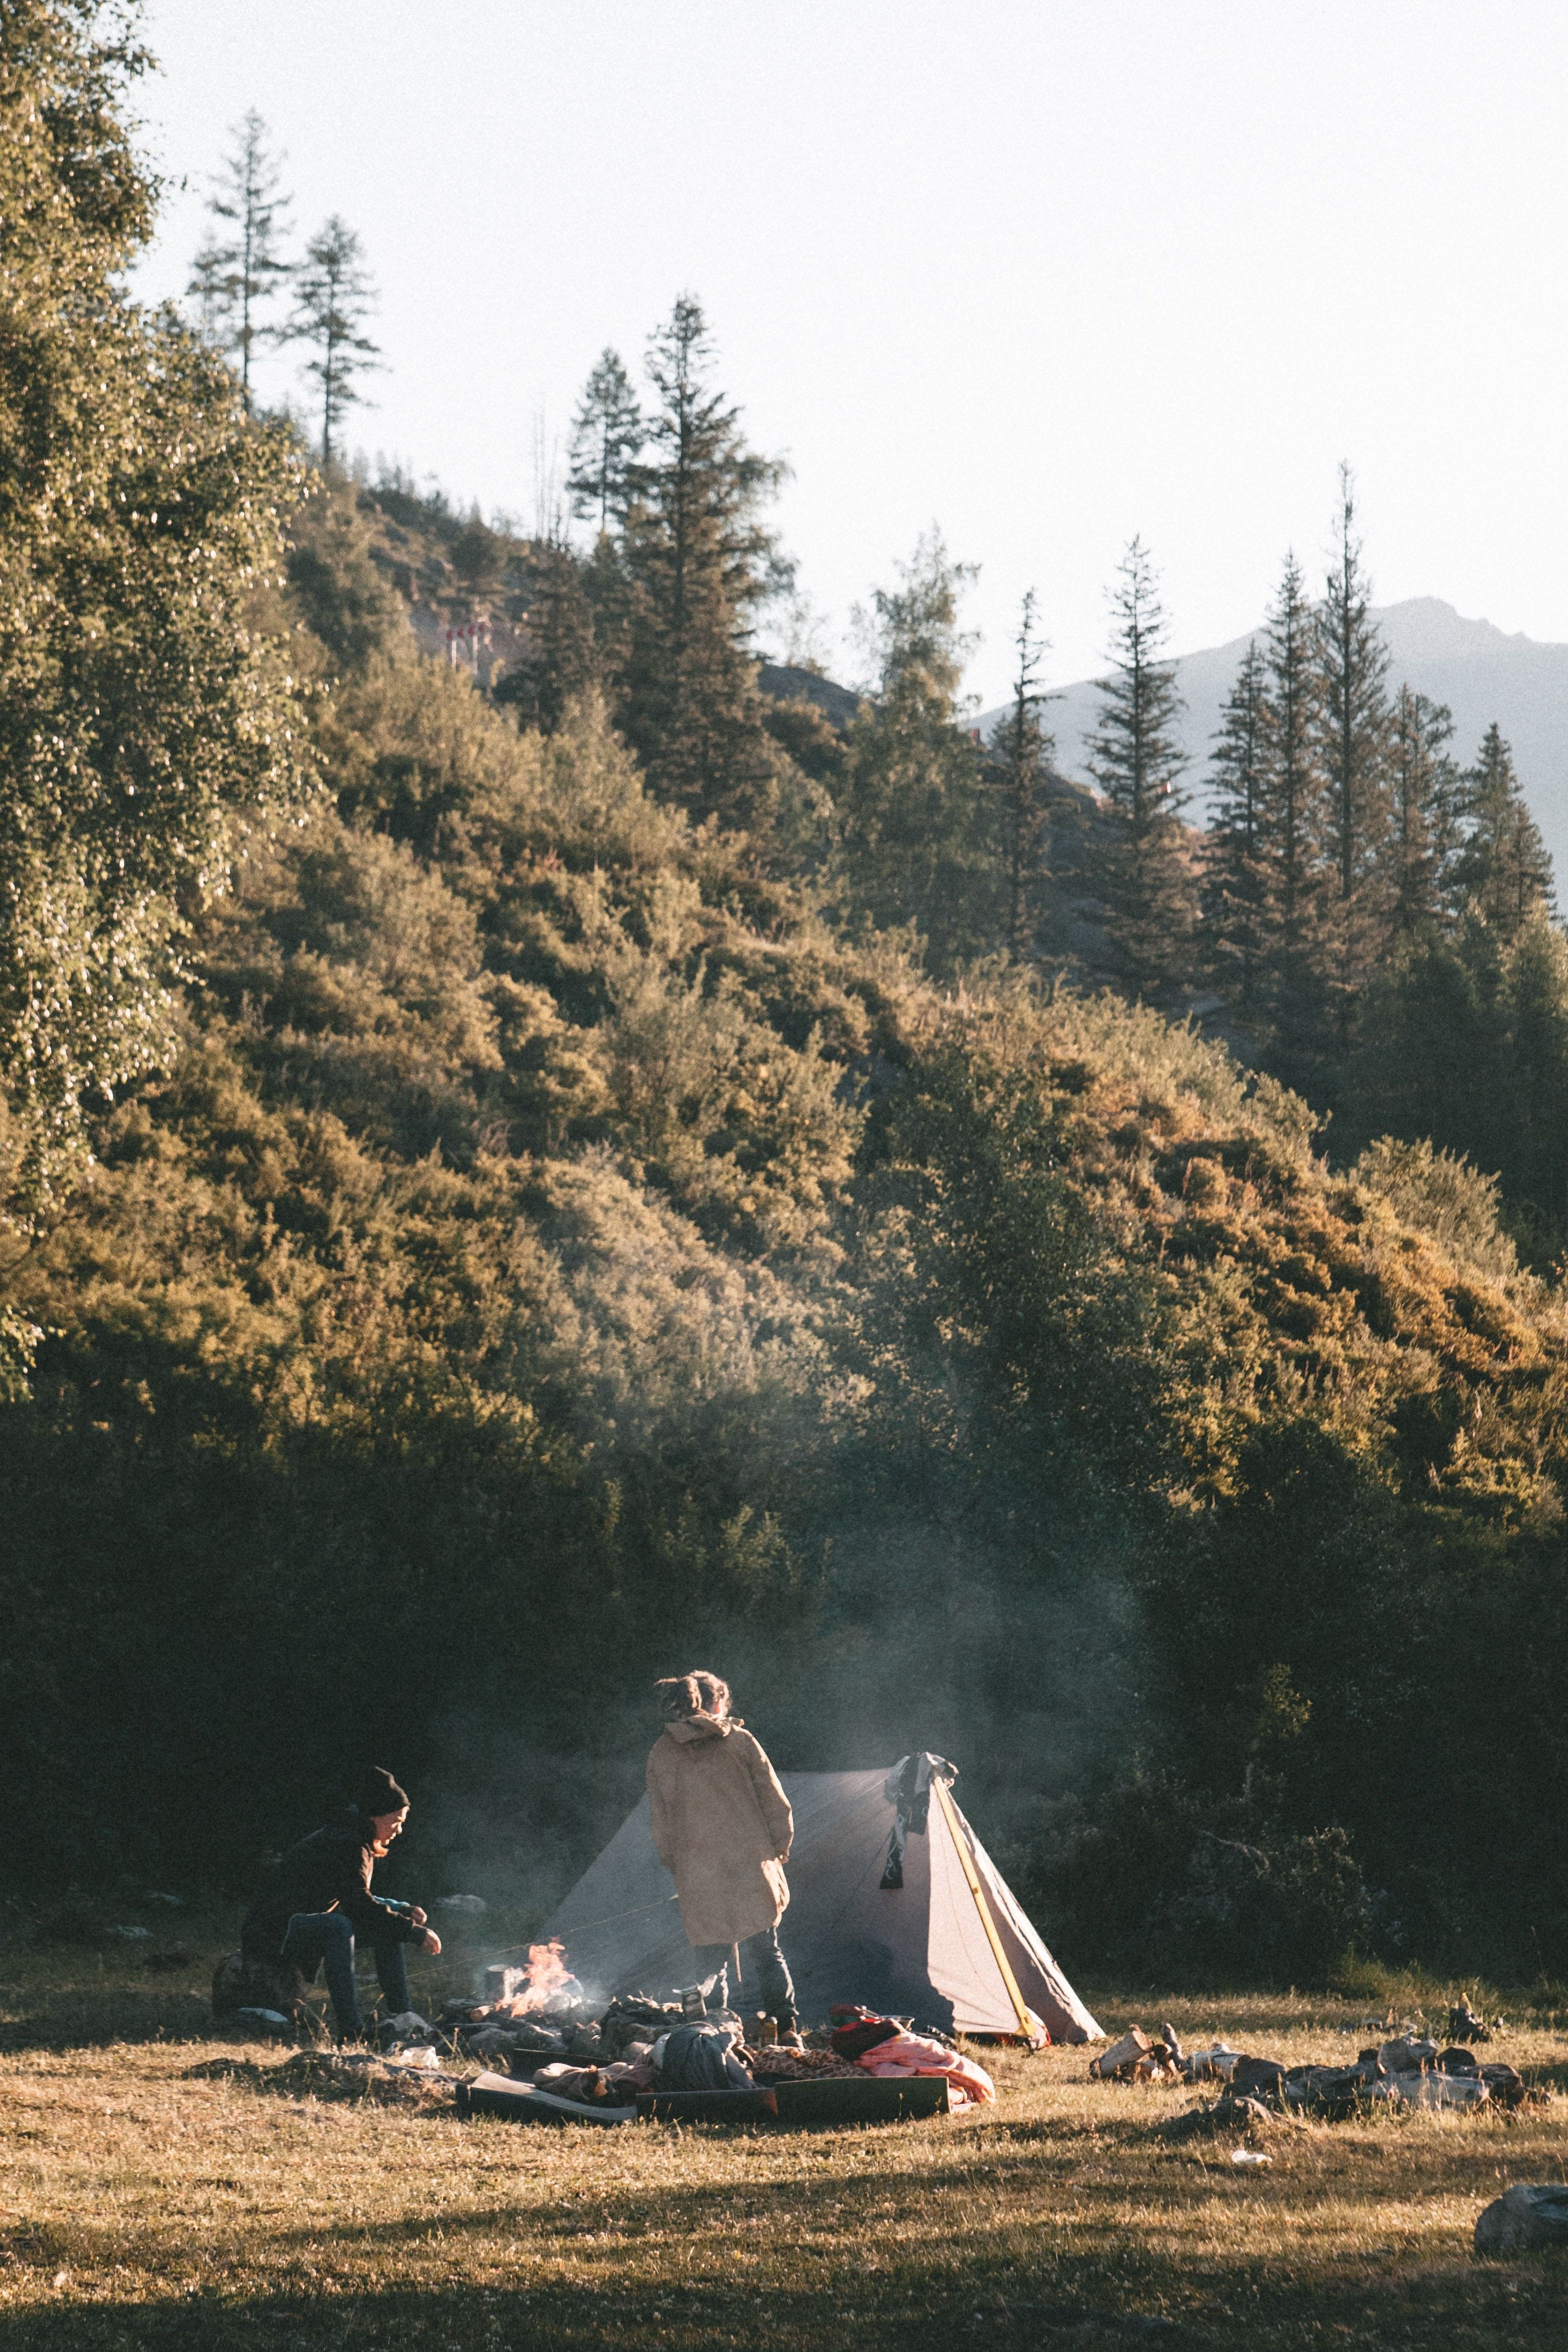 A couple enjoys a cozy campfire in the mountains, surrounded by trees and a beautiful landscape. | Photography by @jamesonmerritt | #camping #mountains #outdoors #photography - Camping